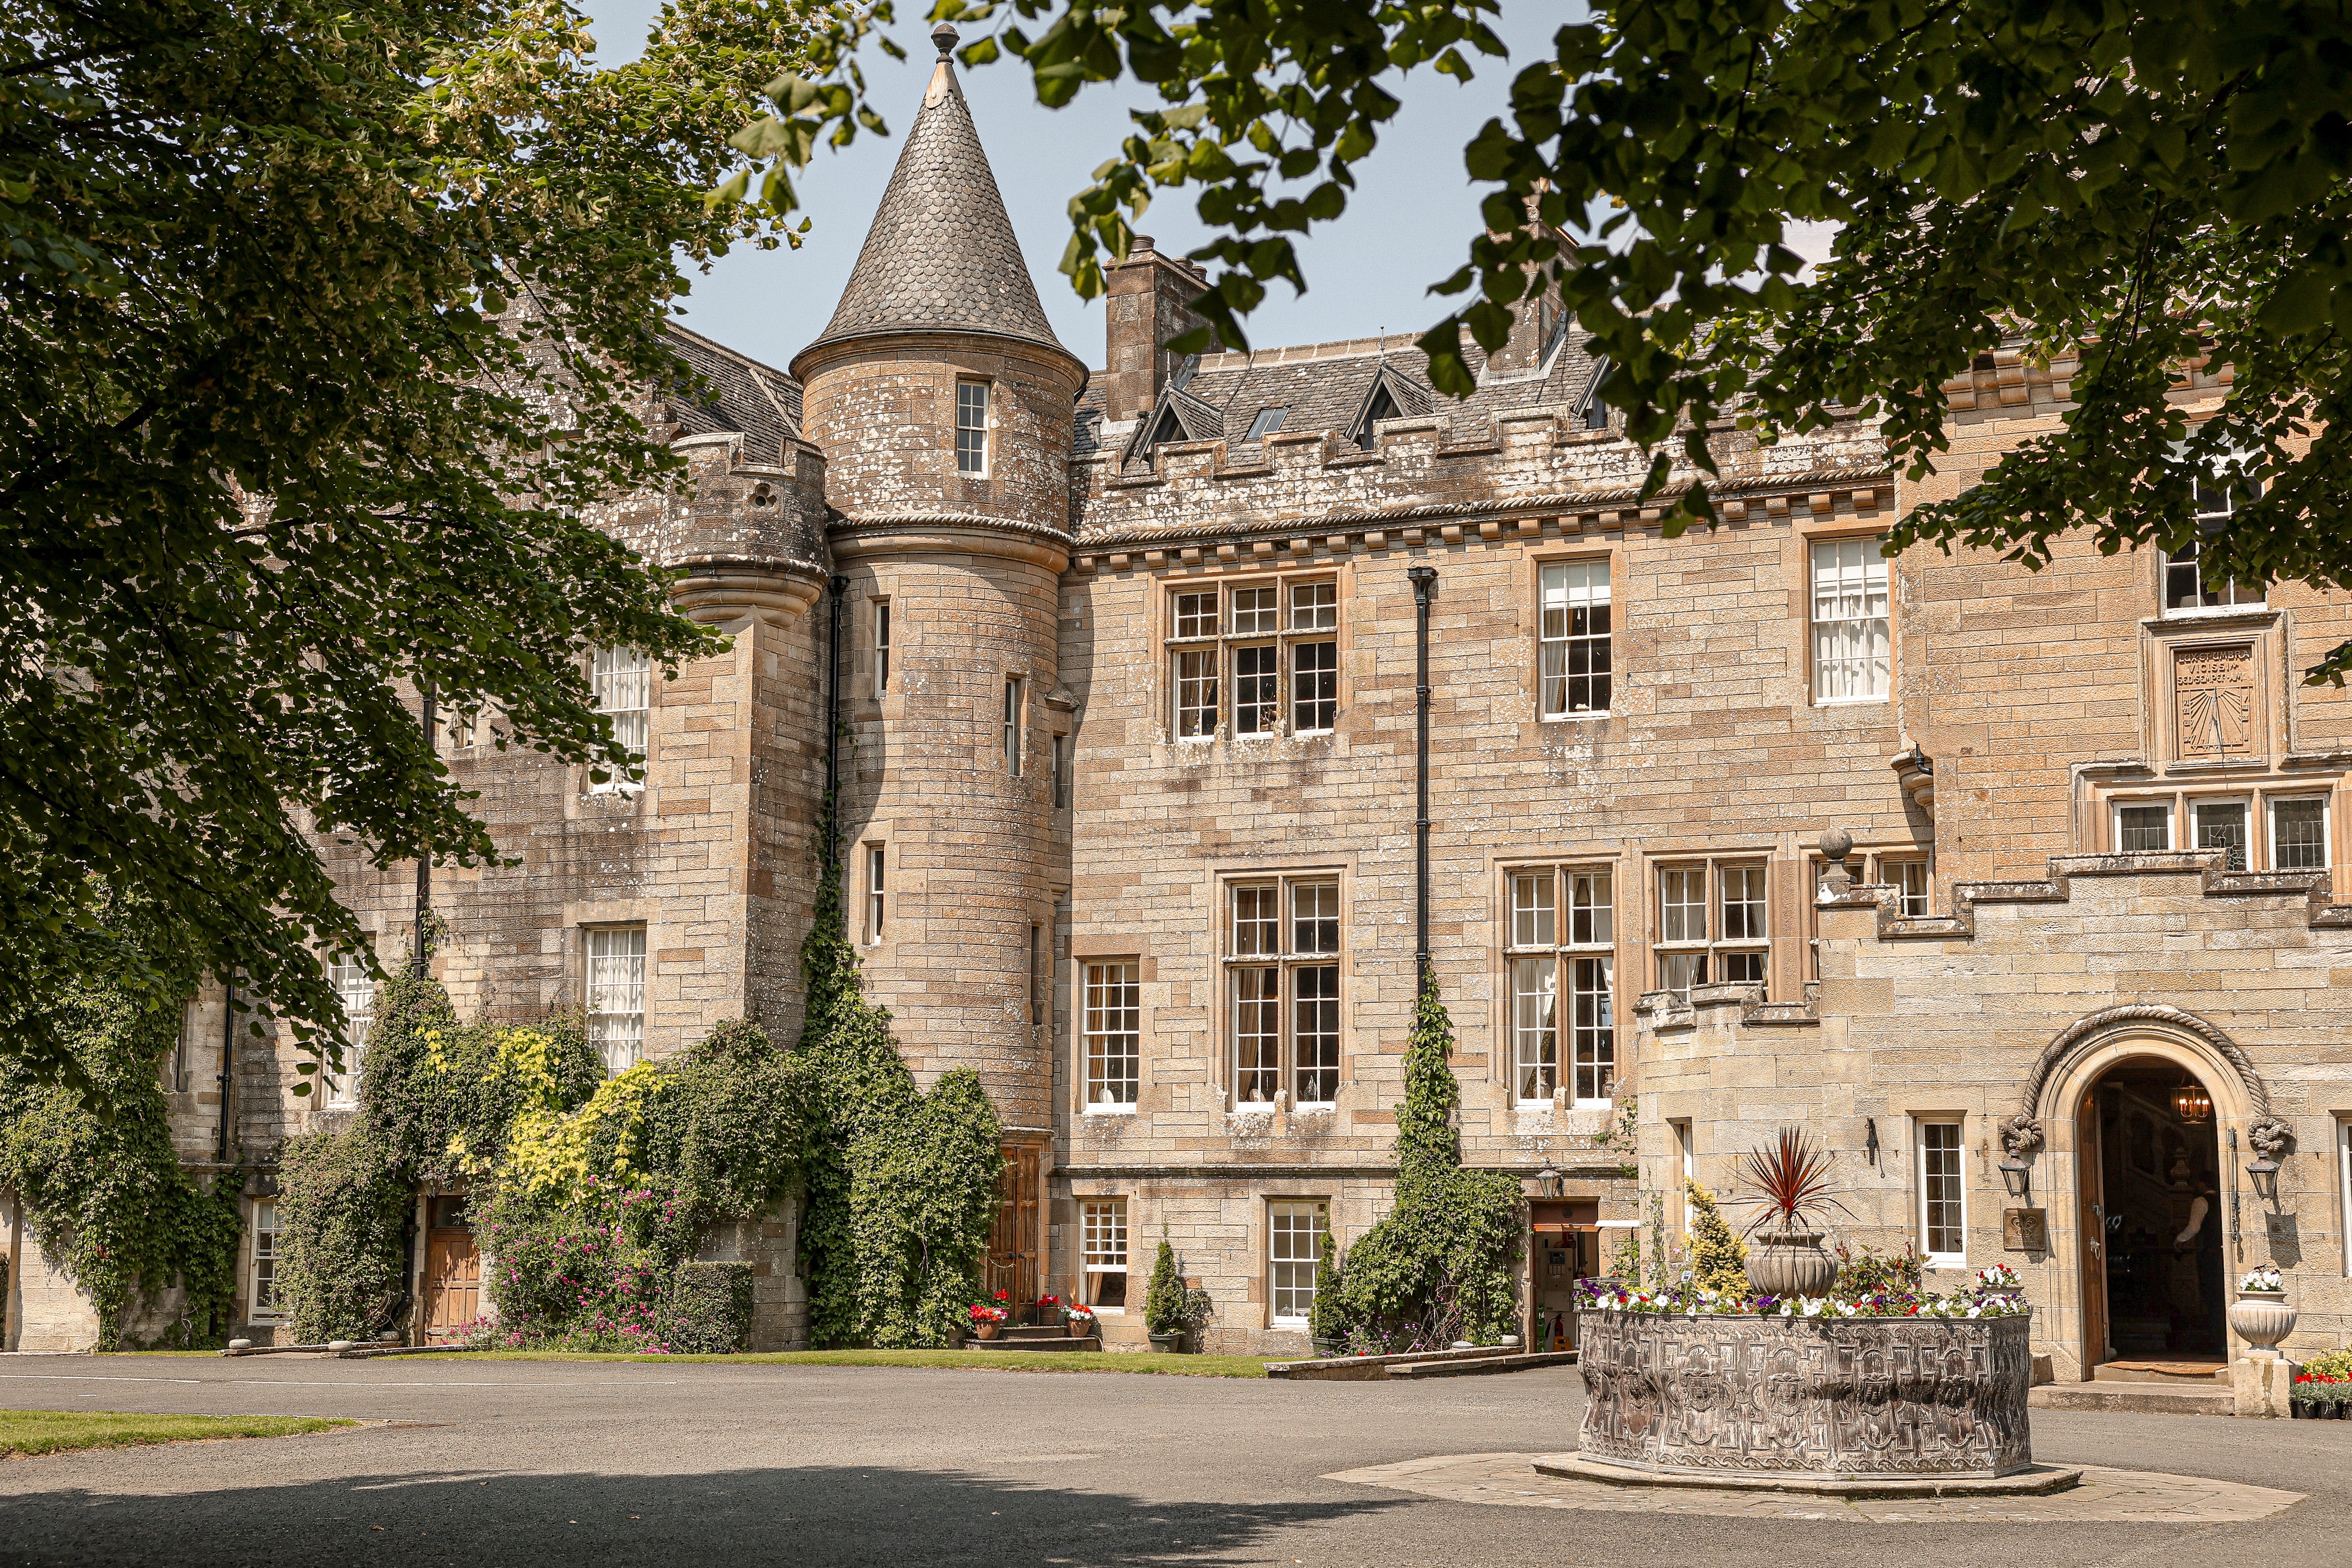 Glenapp Castle’s 17 period suites promise a cosy stay in Scotland